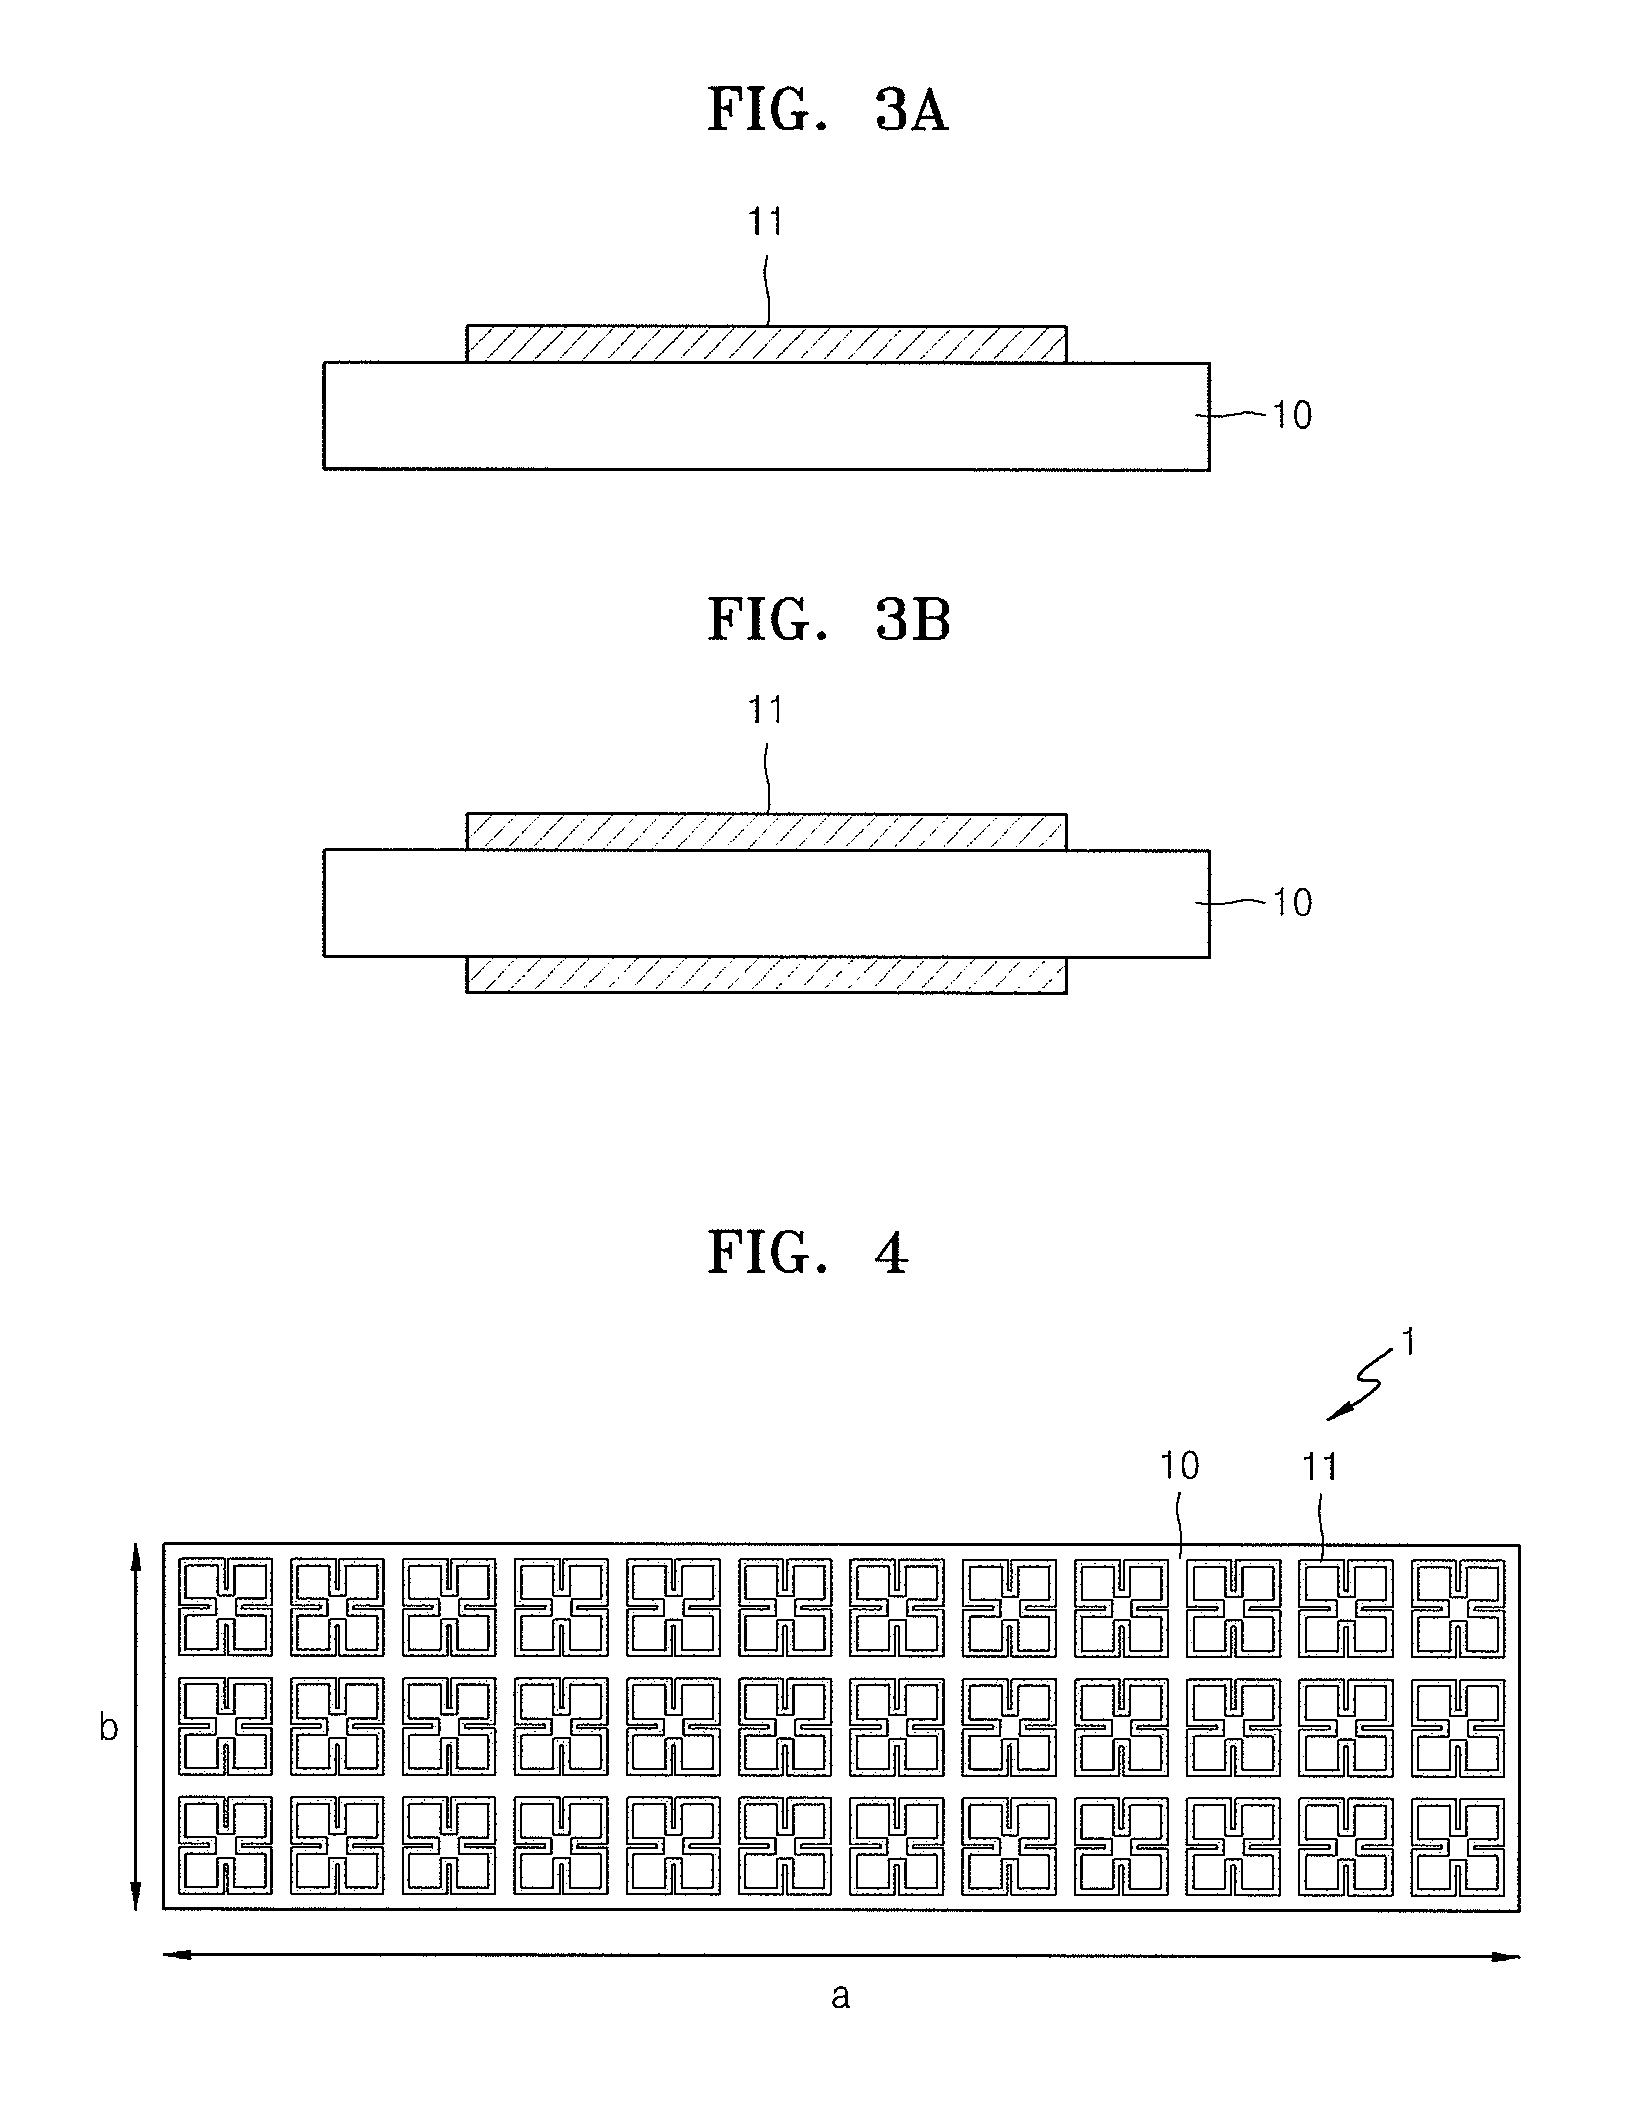 Antenna having metamaterial superstrate and providing gain improvement and beamforming together